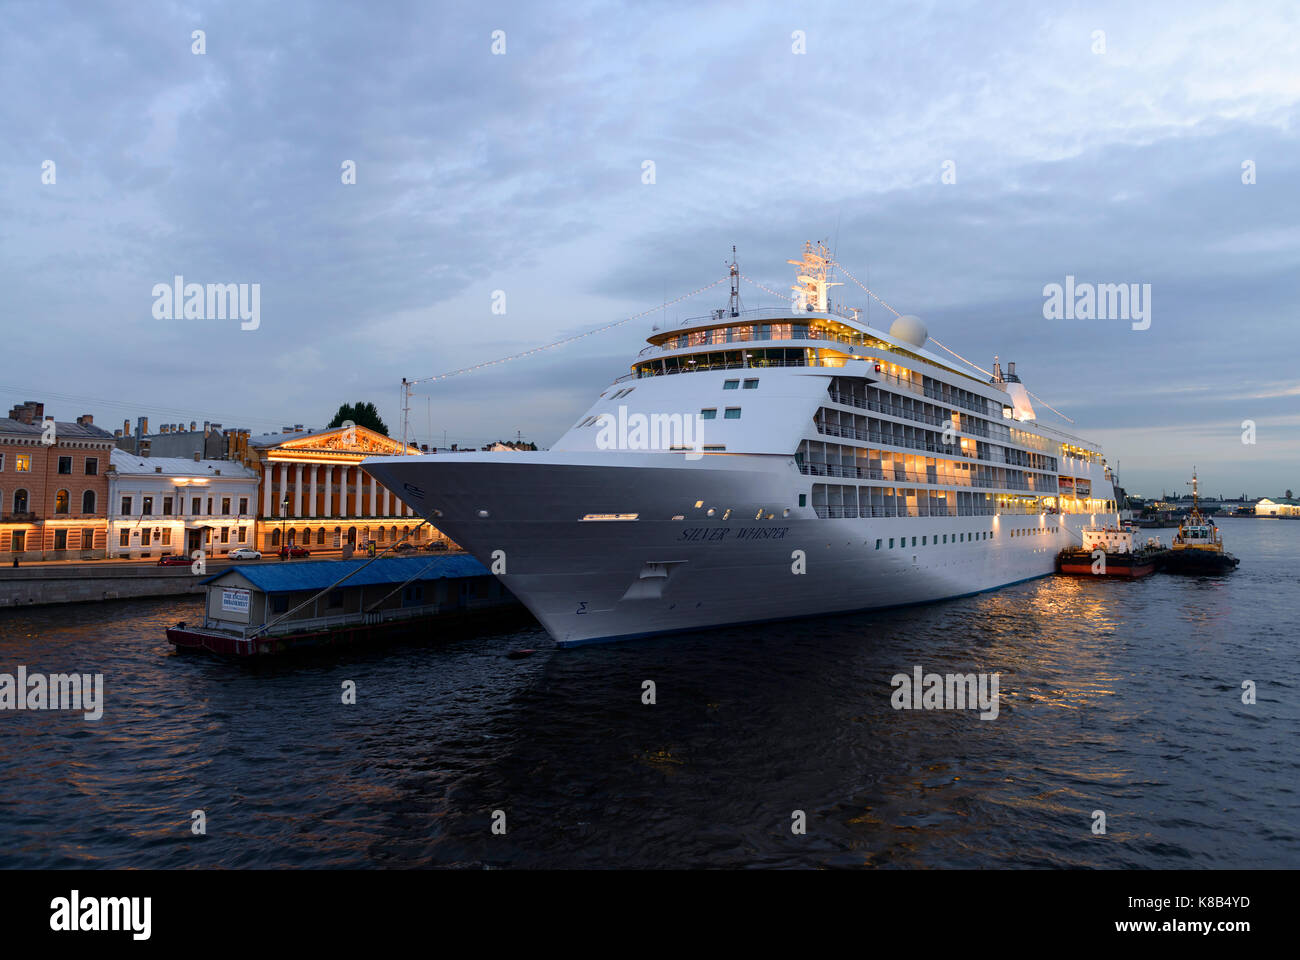 Saint-Petersburg, Russia - August 22, 2016: Large cruise ship 'Silver whisper' is docked in St. Petersburg, August 22, 2016 Stock Photo